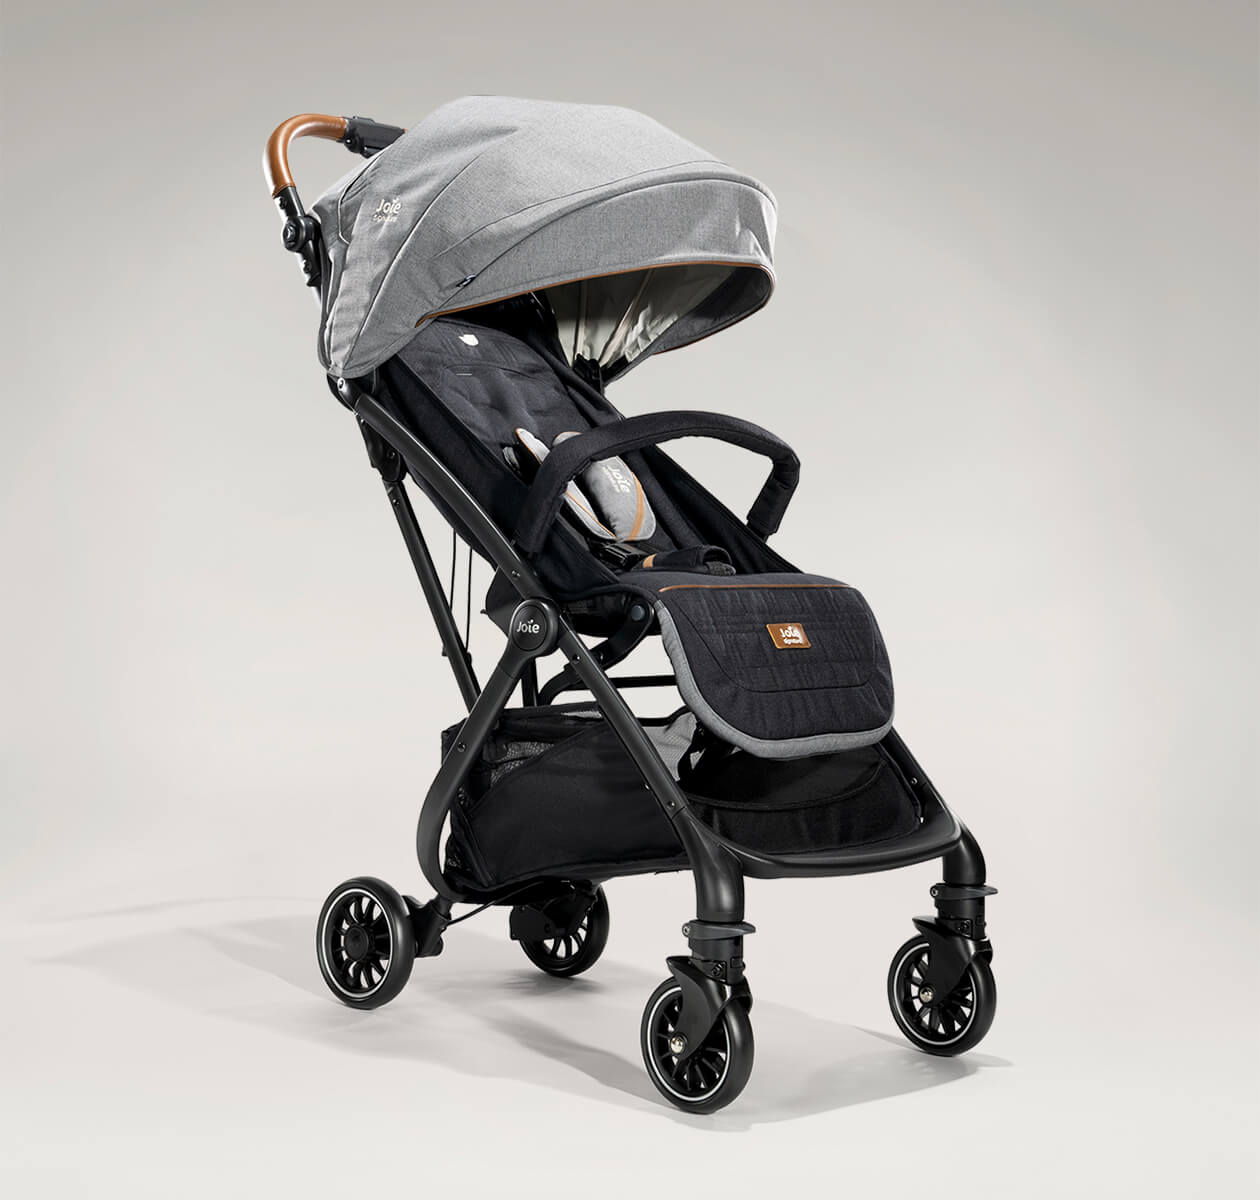  Joie tourist stroller in black and gray at an angle.